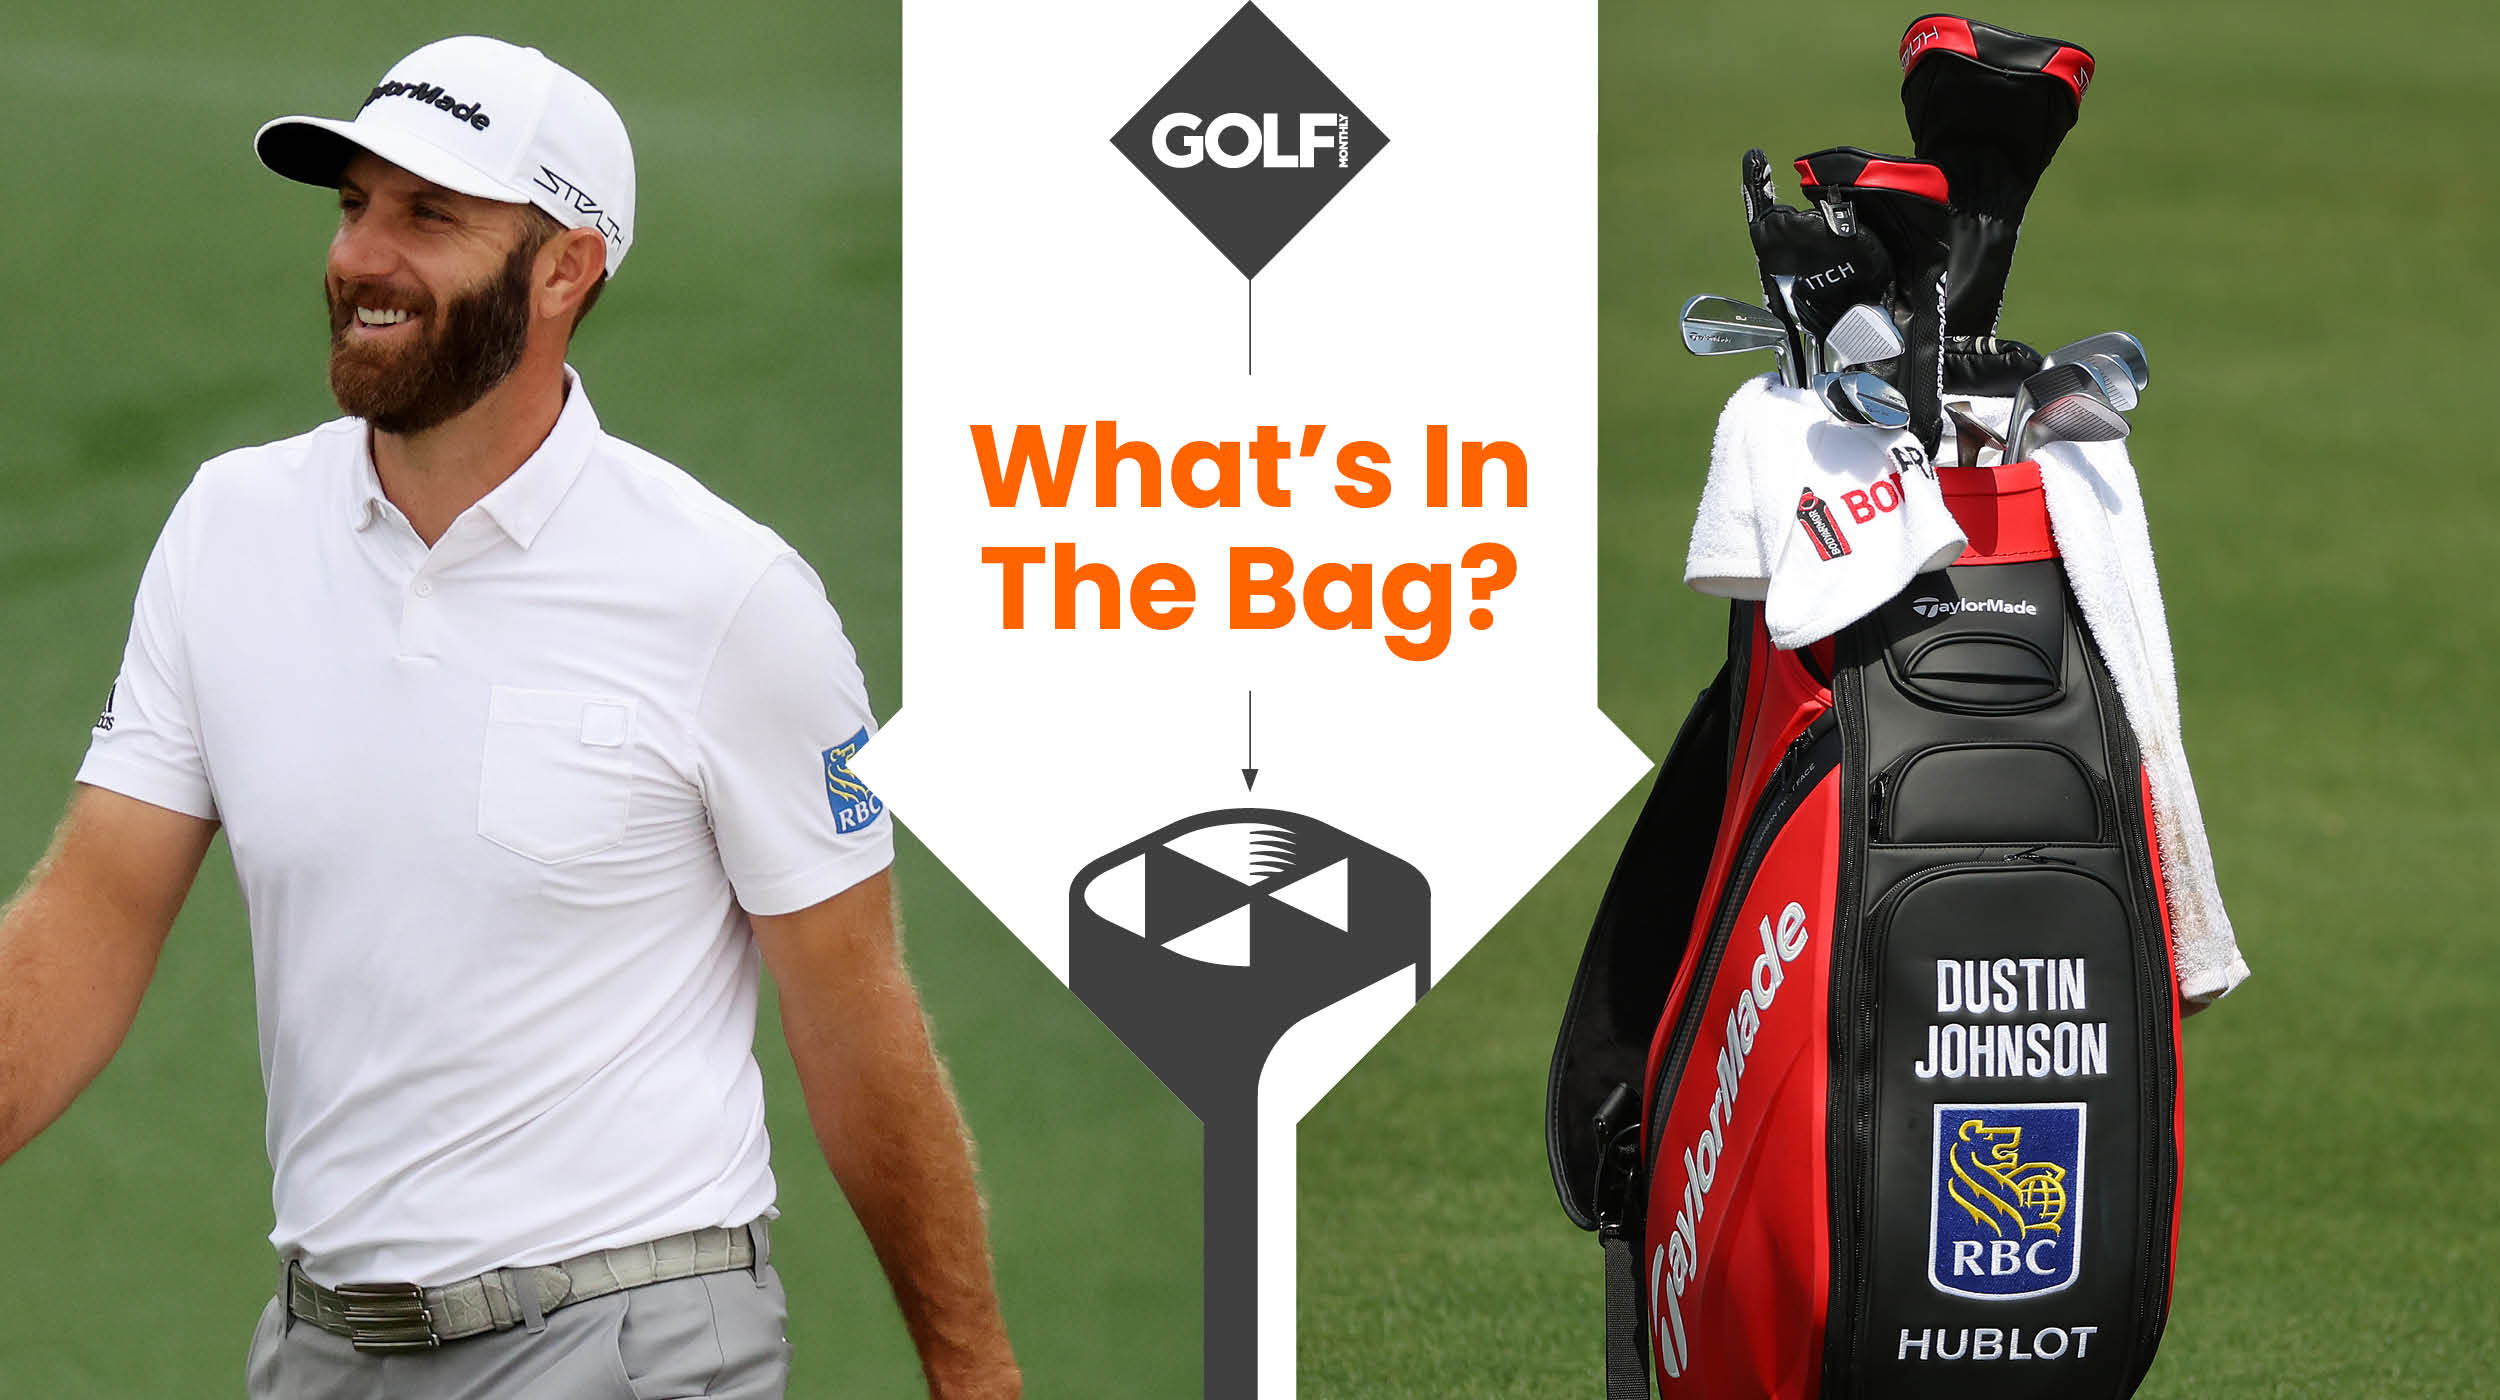 Dustin Johnson Whats In The Bag?